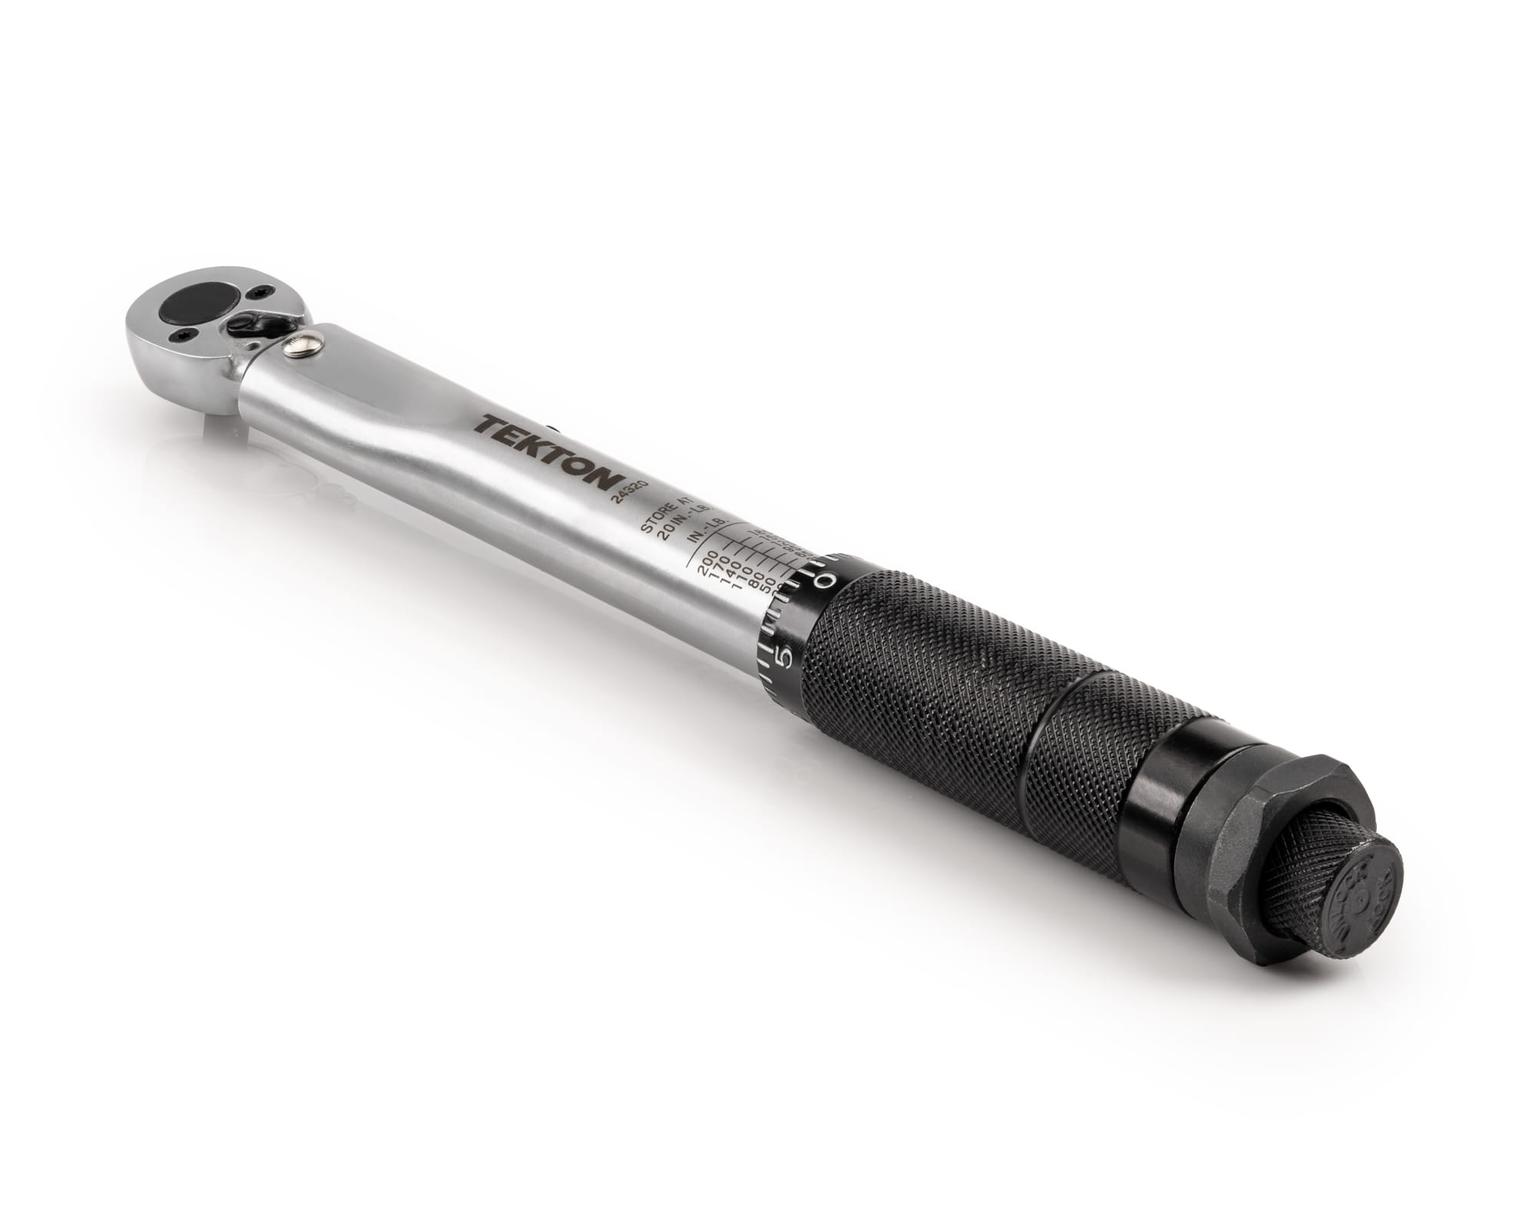 TEKTON 24320-D 1/4 Inch Drive Micrometer Torque Wrench (20-200 in.-lb.)